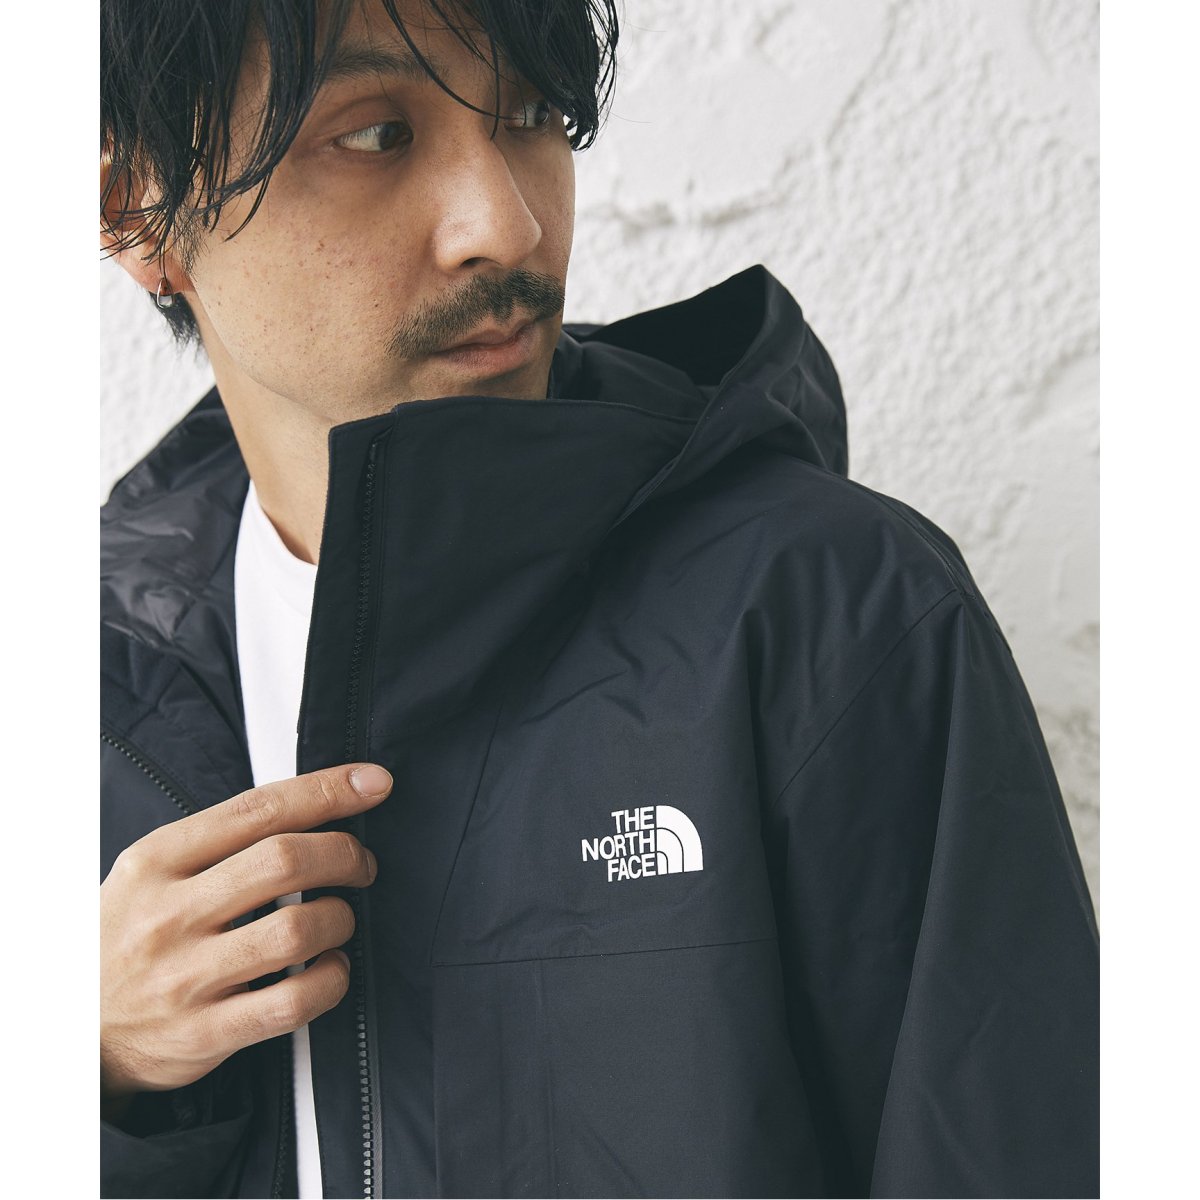 THE NORTH FACE】ストームピーク トリクライメイト ジャケット ...